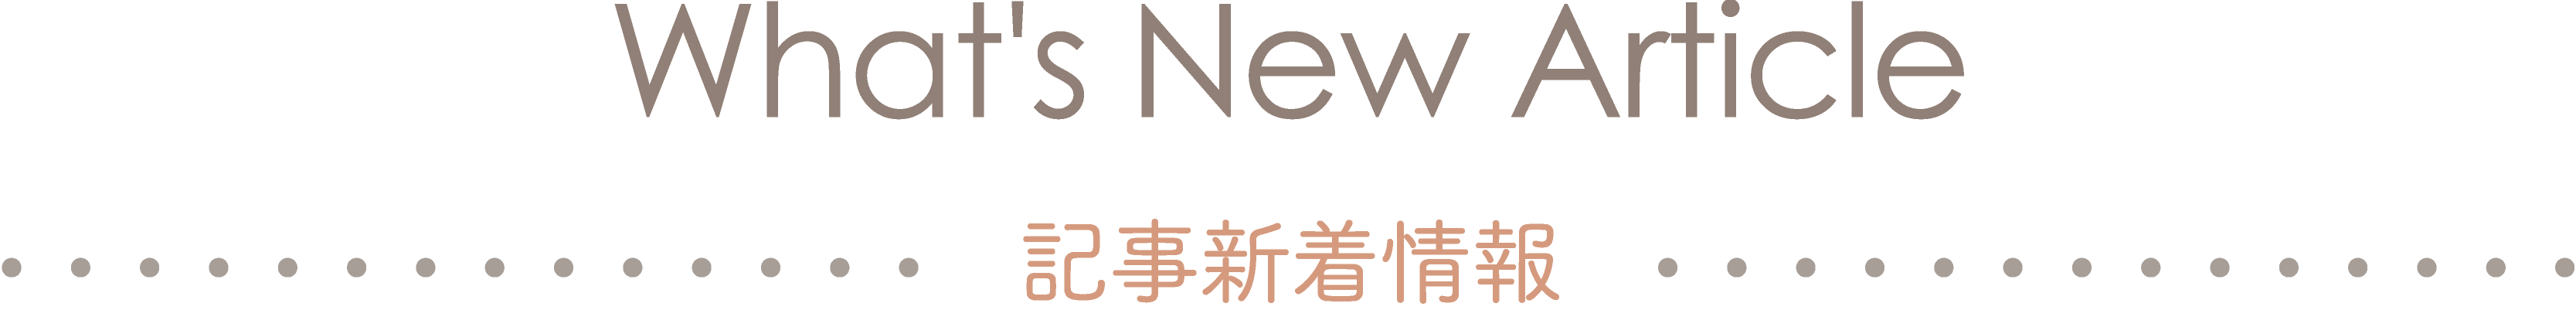 What's New Article　記事新着情報